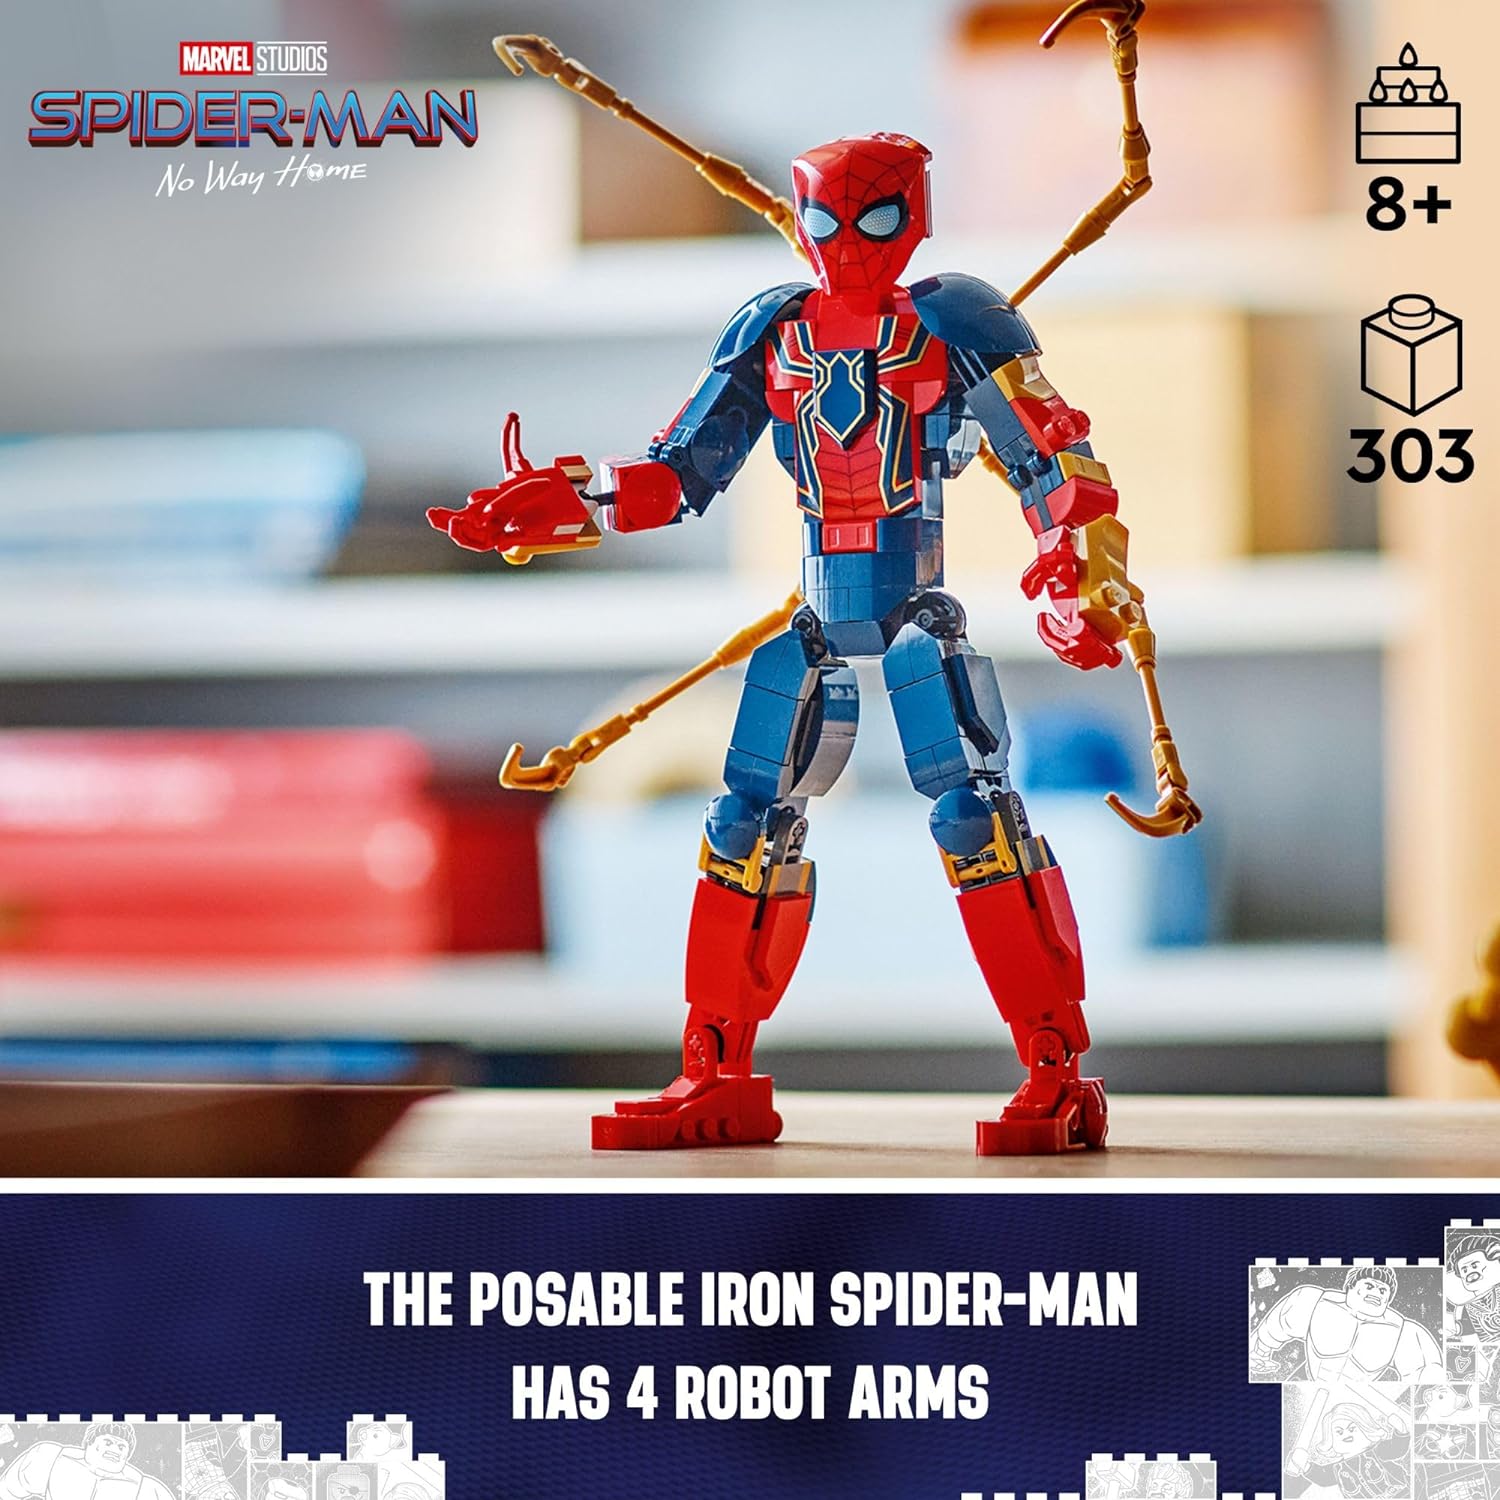 LEGO 76298 Marvel Iron Spider-Man Construction Figure, Super Hero Marvel Toy for Kids, Posable Spider-Man Action Figure with Armor, Buildable Toy Model, Gift for Boys and Girls Ages 8 and Up